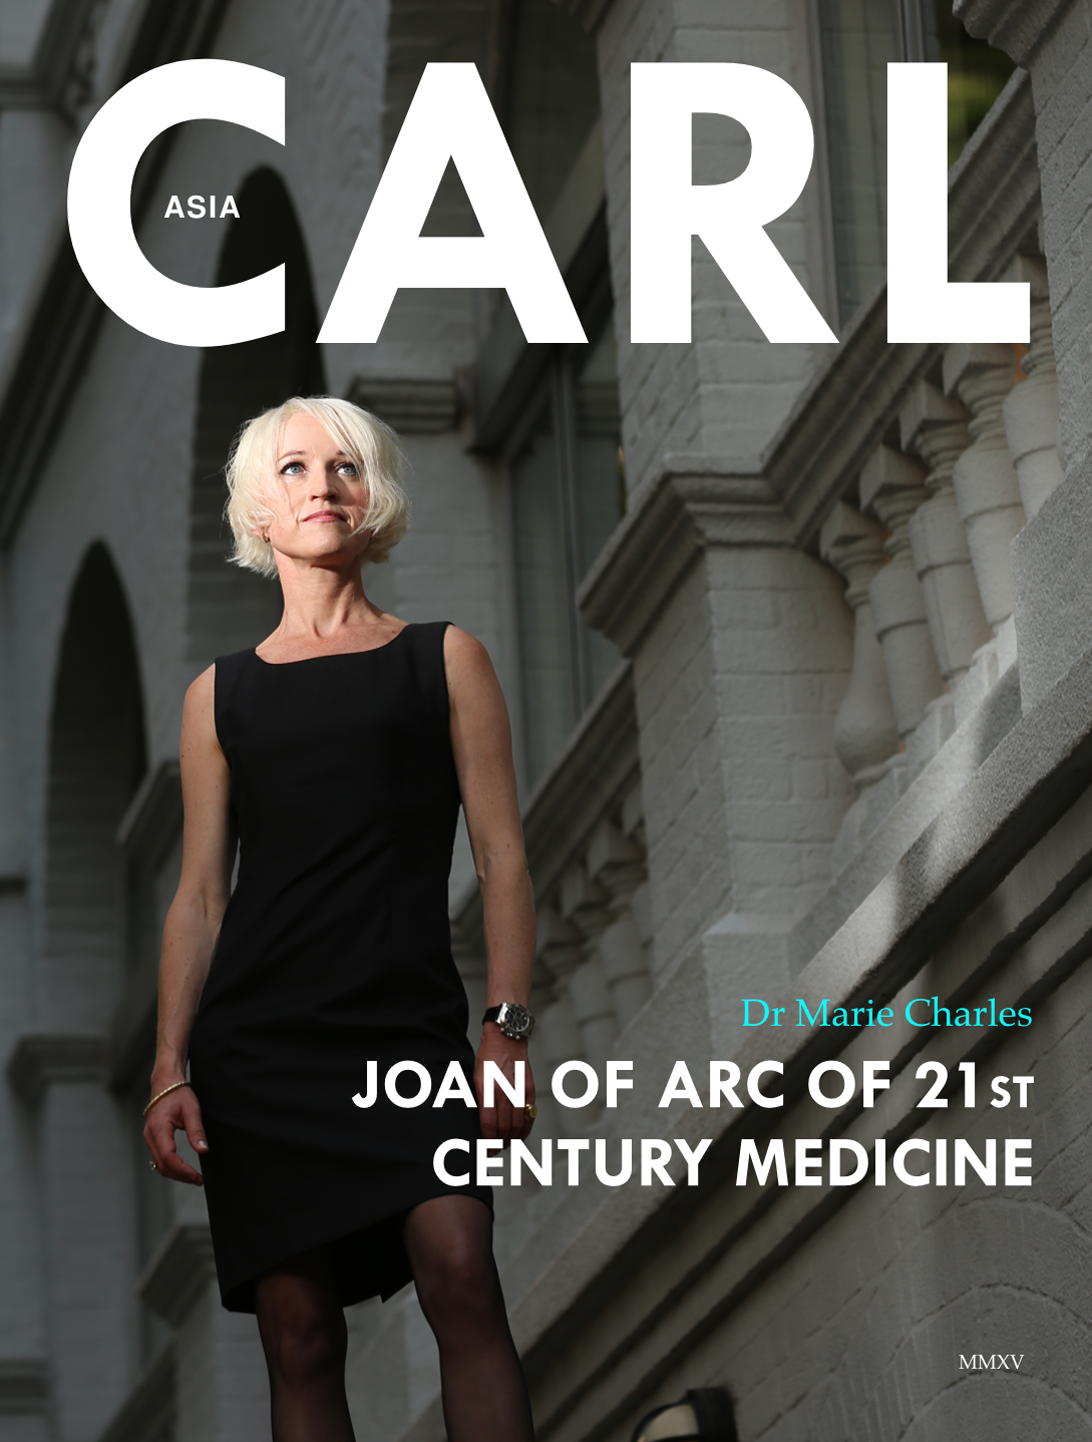 The international medical community and press frequently refer to Dr Marie Charles as the ''Joan of Arc of 21st century medicine'' for her revolutionary national healthcare system building programmes, which save millions of lives throughout  the developing world